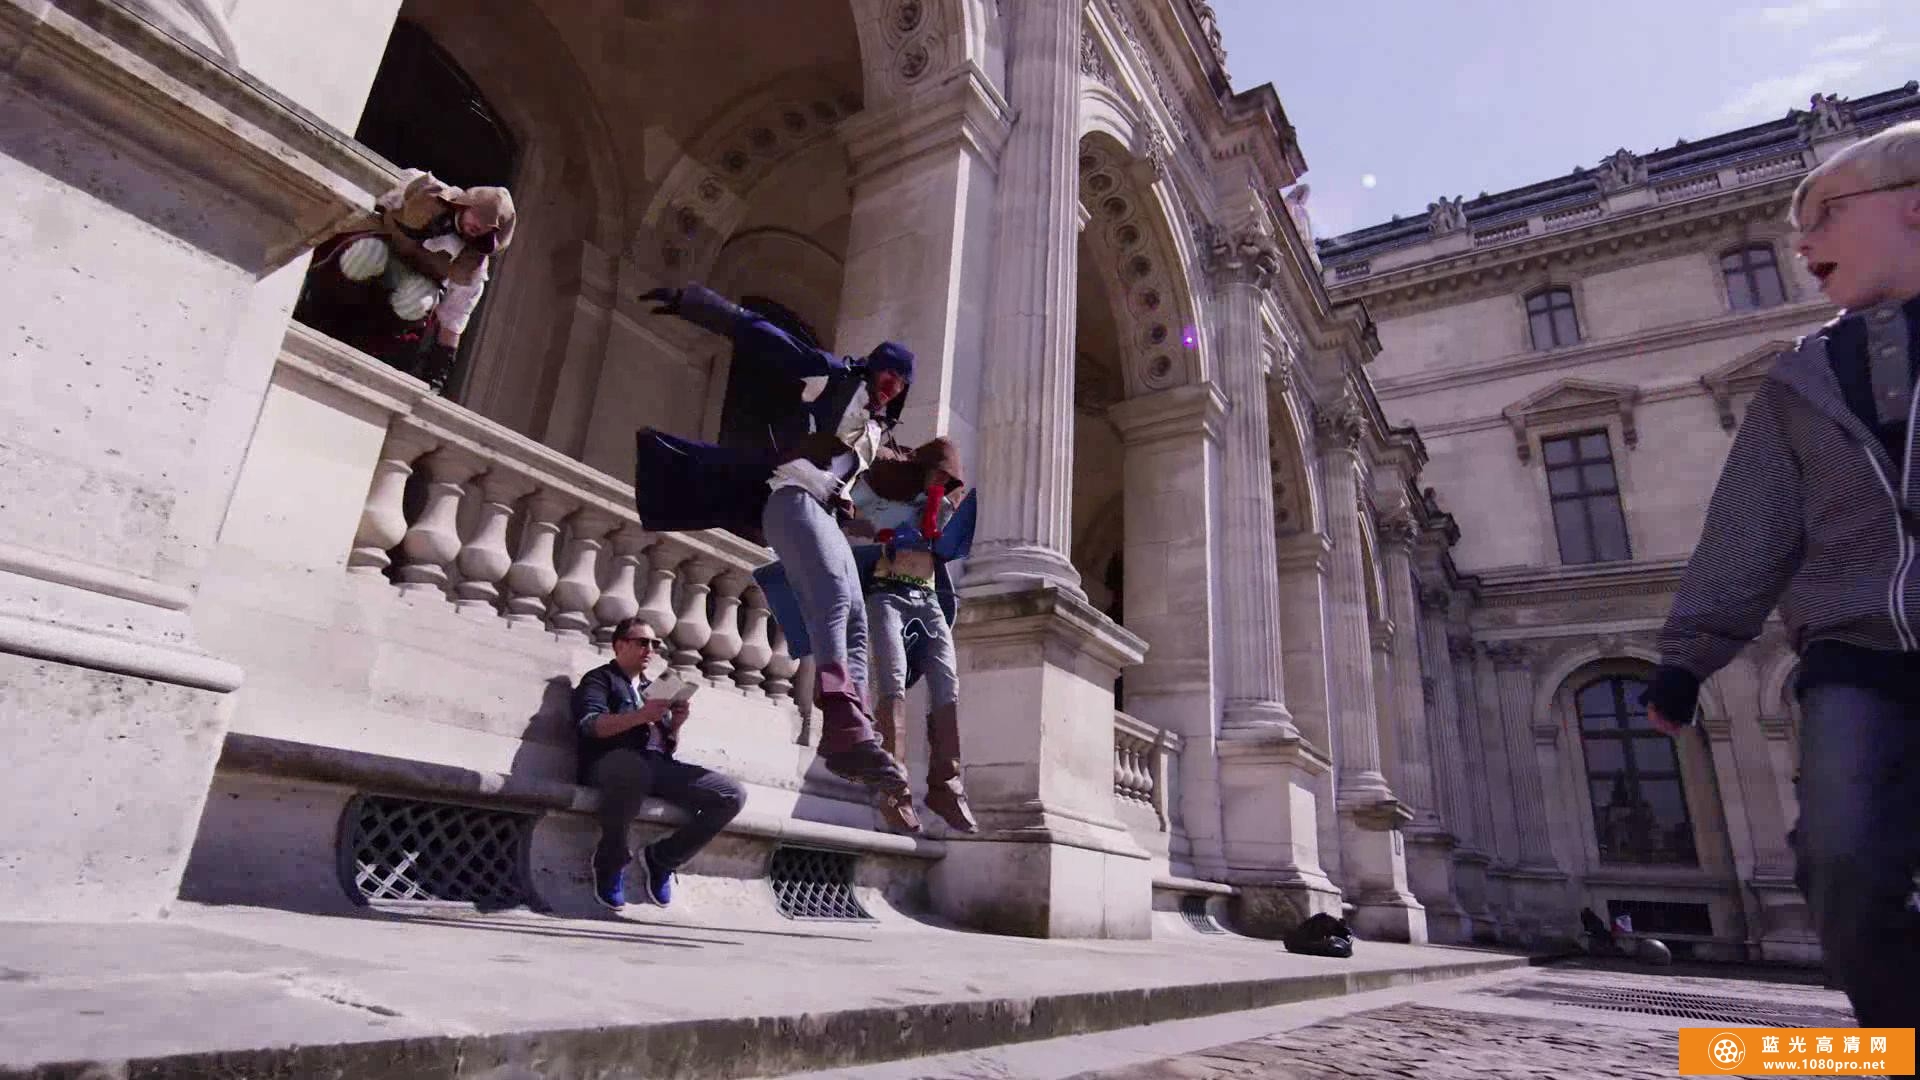 4K 跑酷与刺客信条的对决Assassin's Creed Unity Meets Parkour in Real Life - 4K